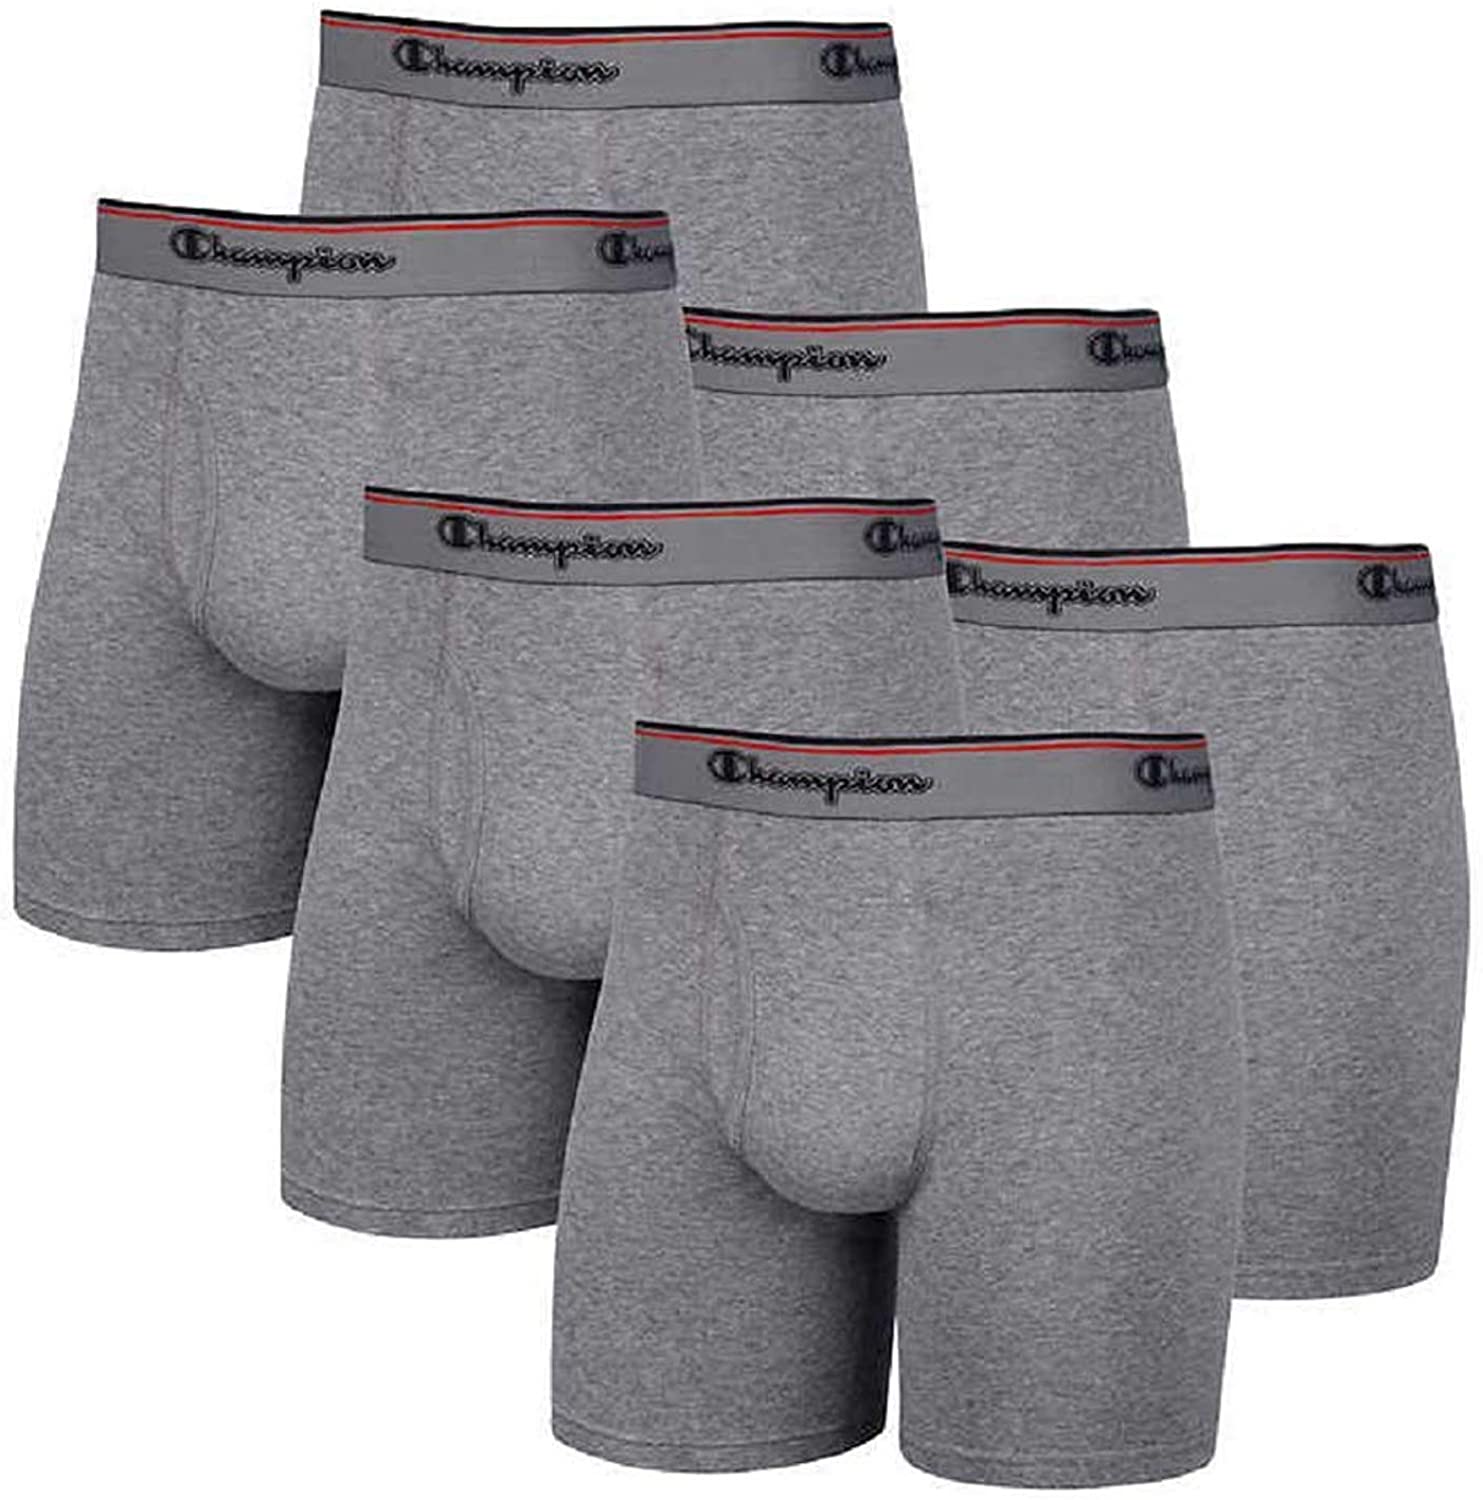 Champion Men's 5 Pack Smart Temp Boxer Brief - New 5 Value Pack (Large,  Grey)